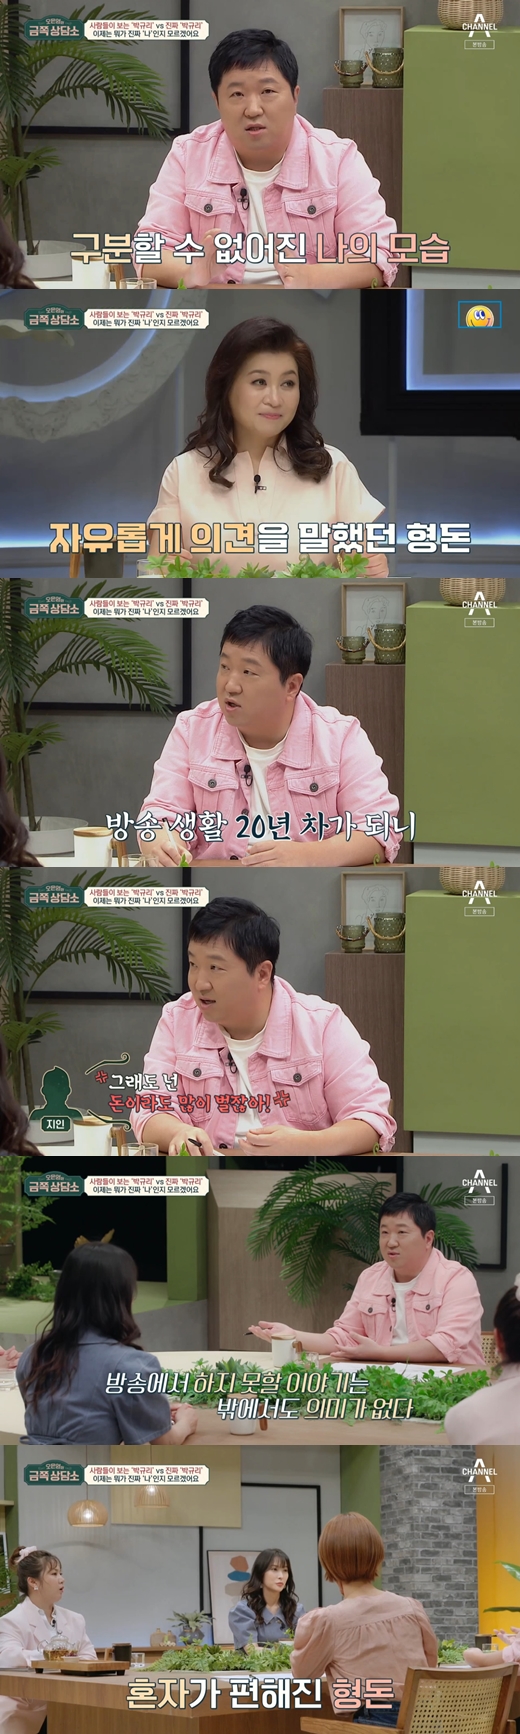 The comedian Jeong Hyeong-don has confessed his troubles.24 Days Channel A Oh Eun-youngs Gold Counseling Center featured Park Gyuri, leader of the group KARA, who told Oh Eun Young about his troubles.I do not know what is on the air anymore or what is really my appearance, said Jeong Hyeong-don, who listened to Park Gyuris story that it is hard to get out his story on this day.I have been broadcasting for more than 20 years, so there are many stories I want to tell. I talked to you when I was an office worker. Jeong Hyeong-don said, When I talk to my long-time acquaintances, I get a response that says, But you make a lot of money.So I do not say anything, and the meeting with people is reduced. Alone has more time. 